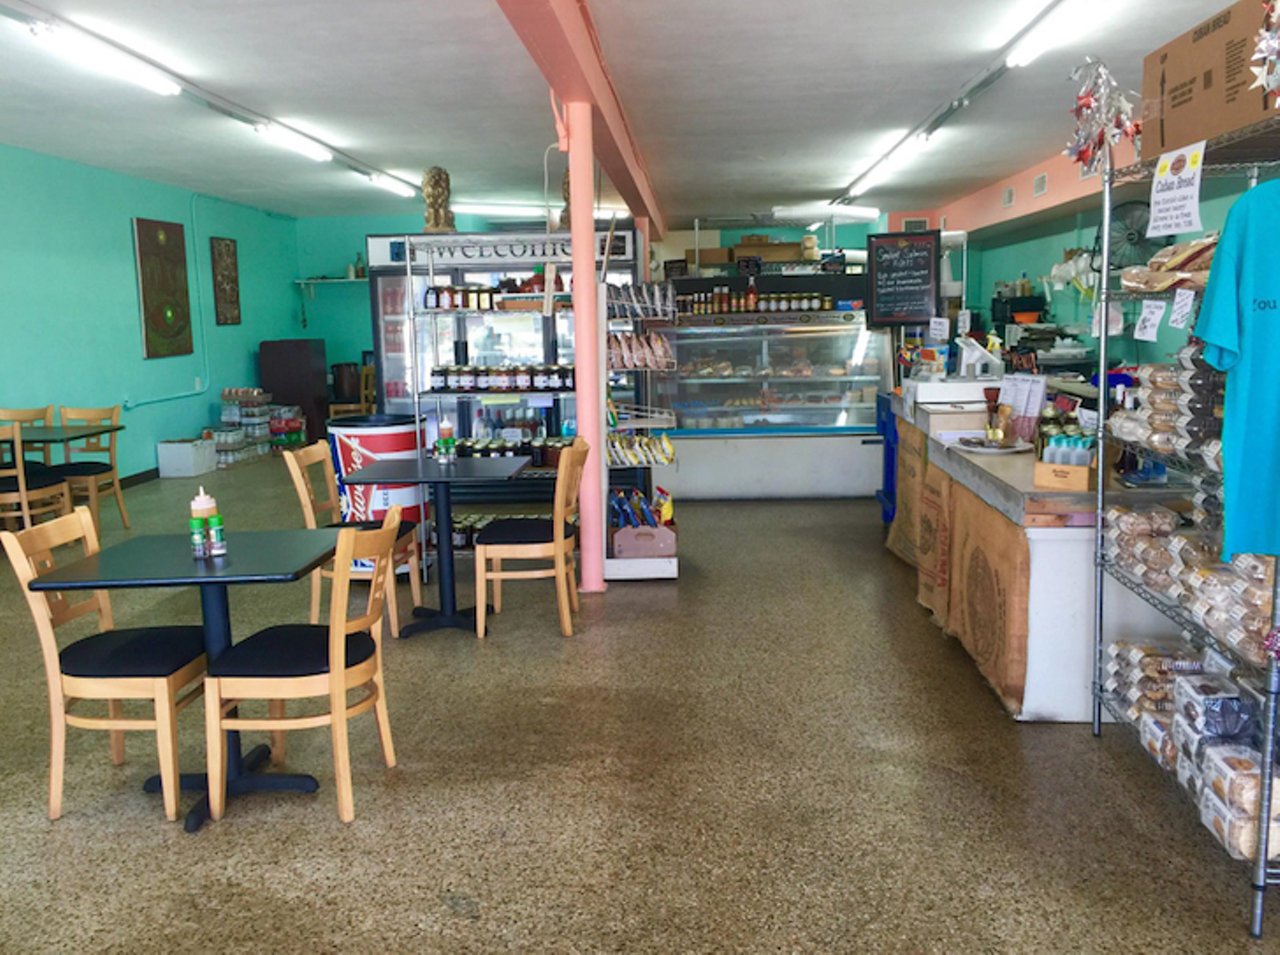 Havana Harry's Market  
14219 Walsingham Rd, Largo
This is the place to go for a hot pressed Cuban sandwich. Havana Harry&#146;s also has a fresh deli to grab slices to make sammies at home, but you might want to get one to go for the hell of it. 
Photo via Havana Harry's Market/ Facebook